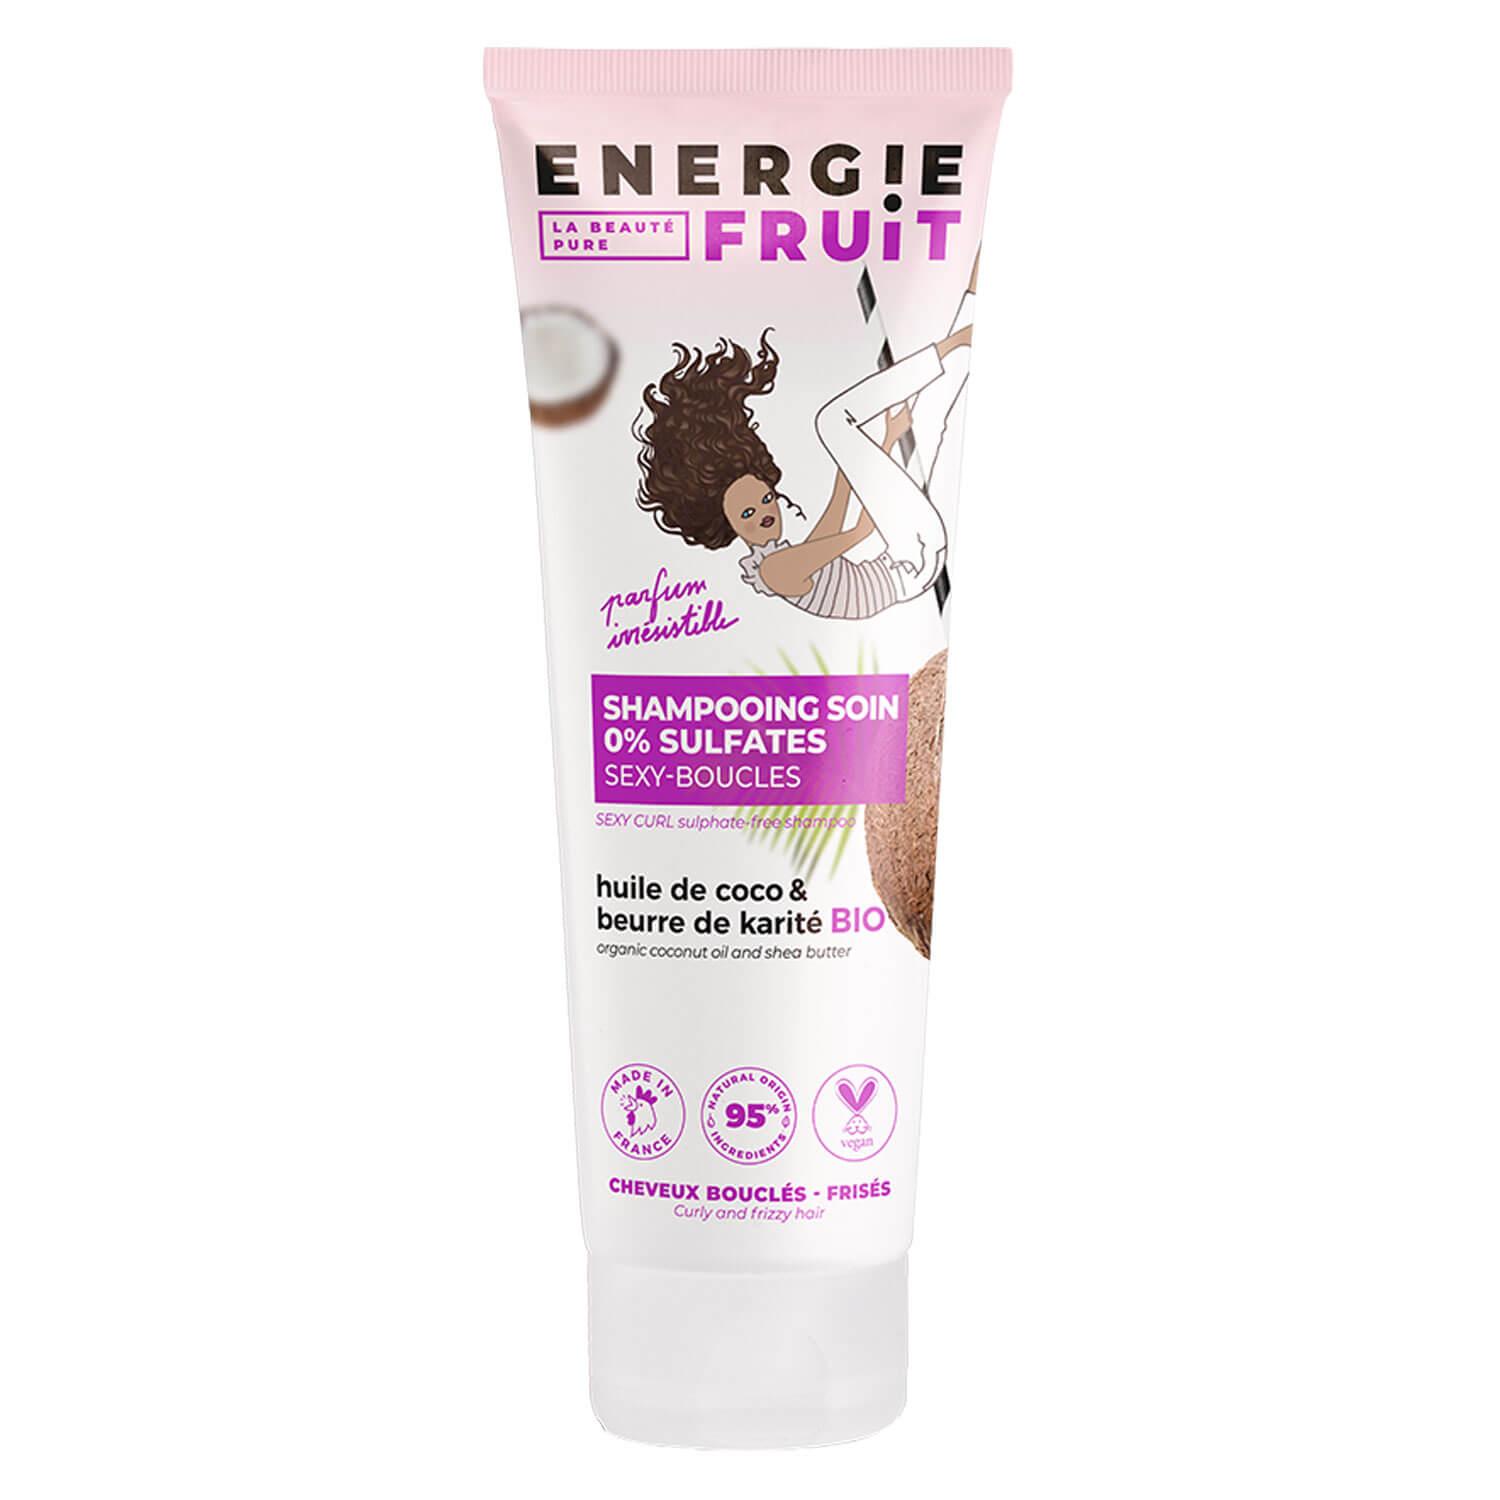 ENERGIE FRUIT - Sexy Curl Sulphate-Free Shampoo